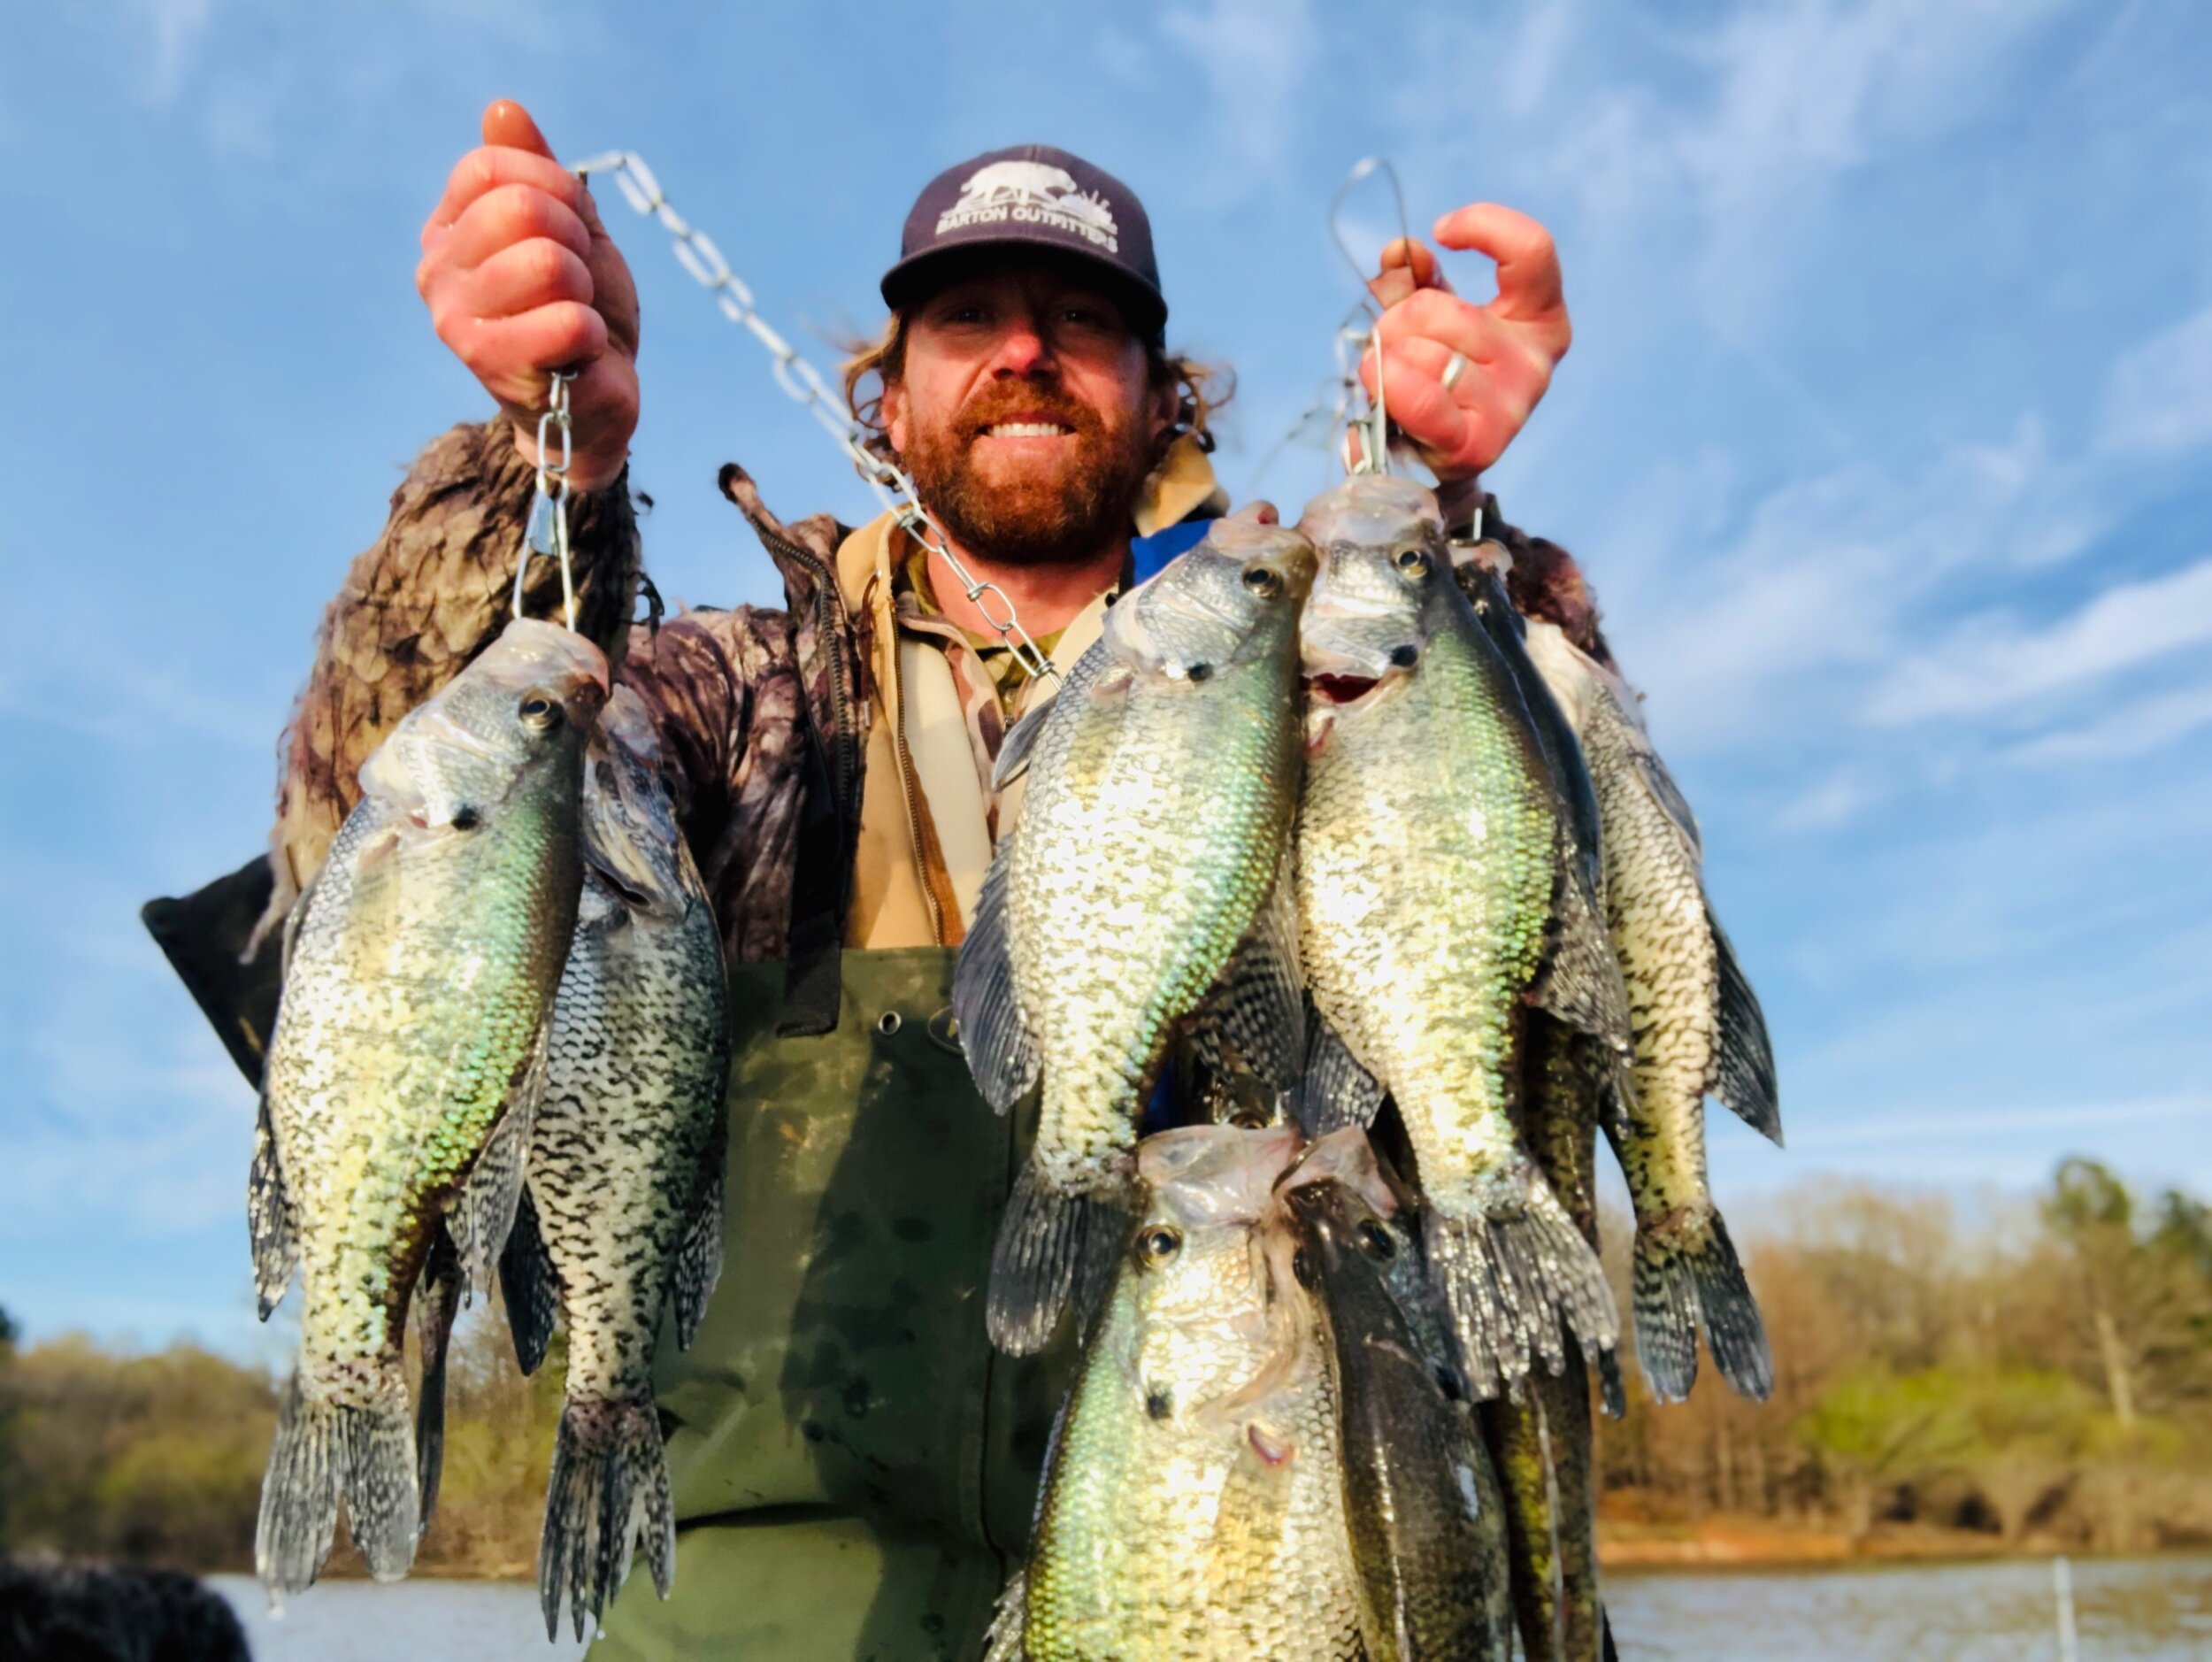 All-Inclusive Guided Crappie Fishing Tour - 2 Anglers — Barton Outfitters